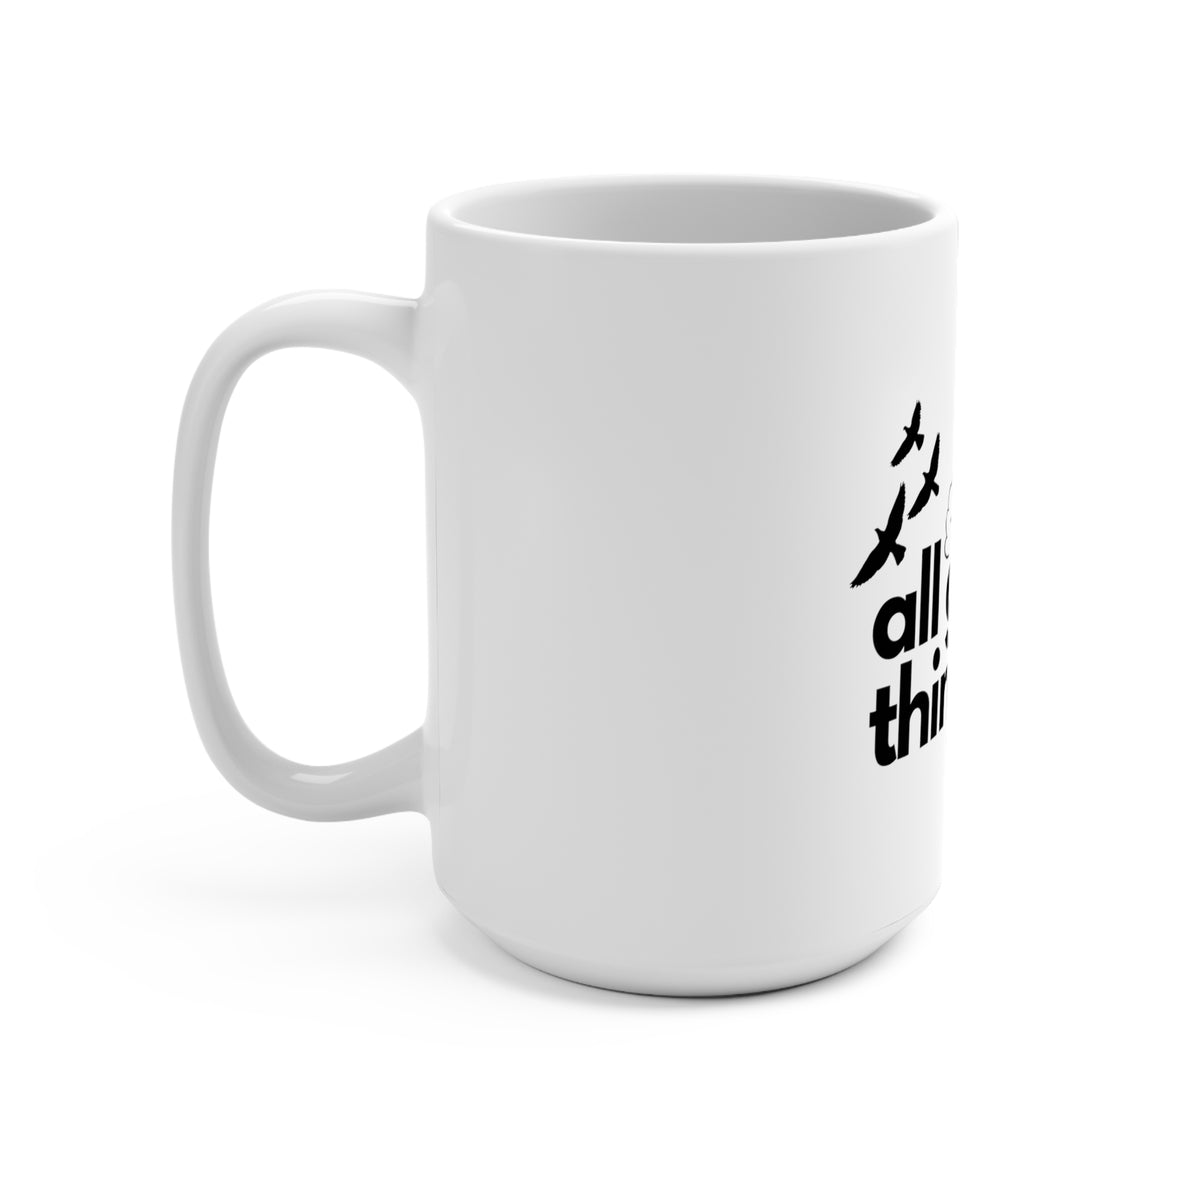  A Lot Going On At The Moment - Large 15 oz White Coffee Mug Cup  (Print on Both Sides) : Handmade Products